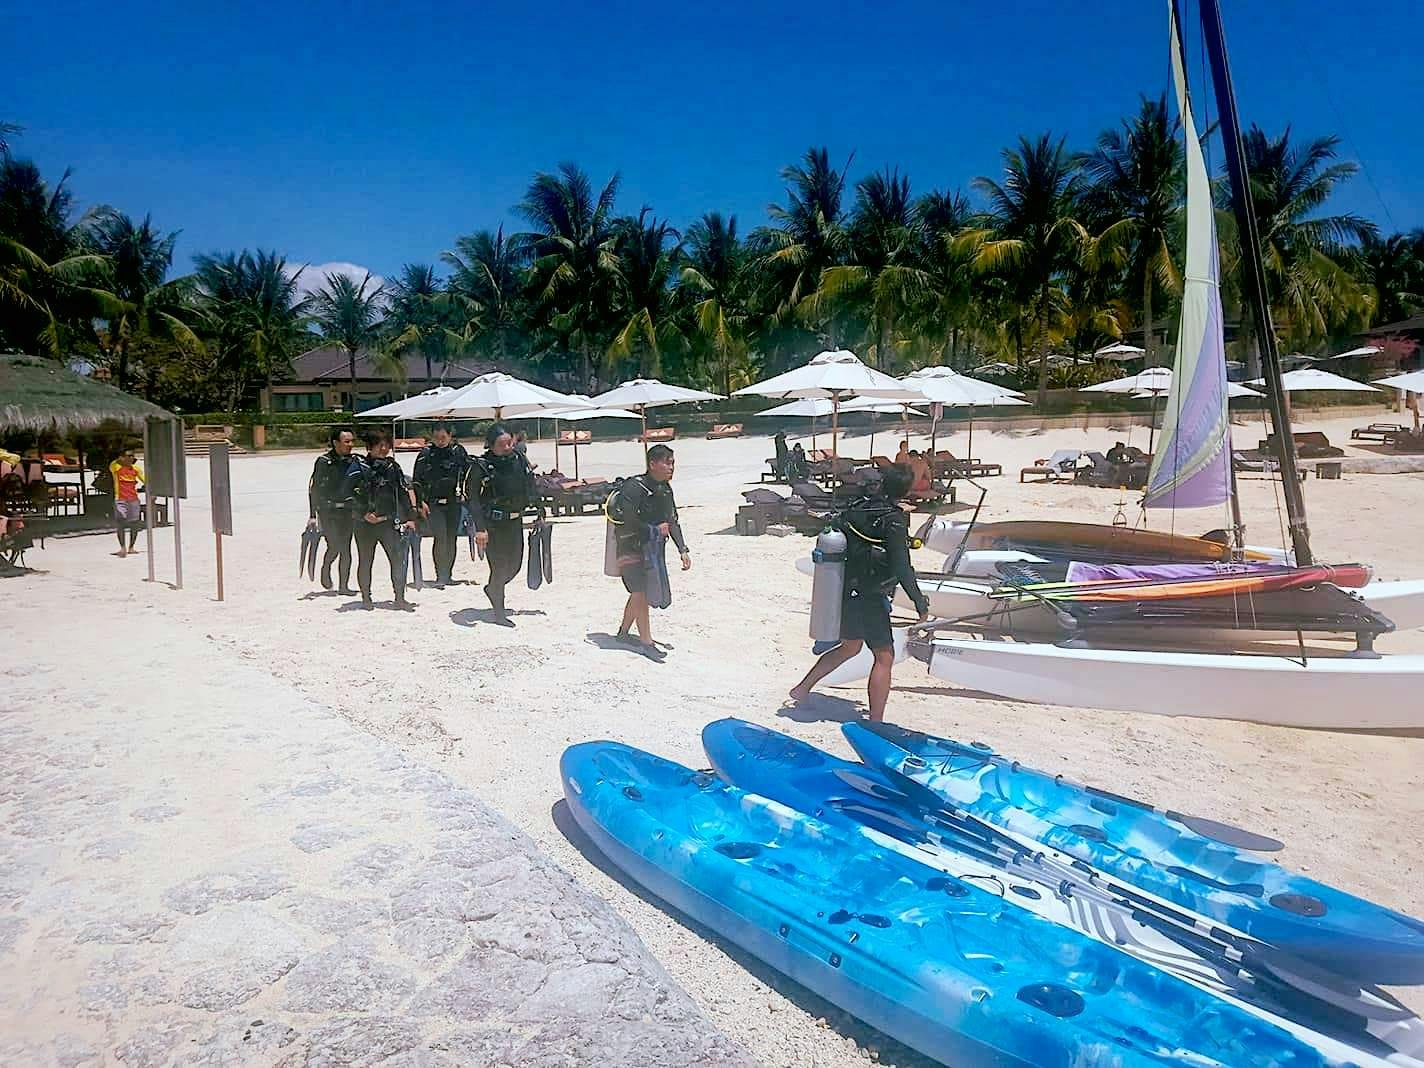 Group of tourists going on a diving session in Mactan Cebu